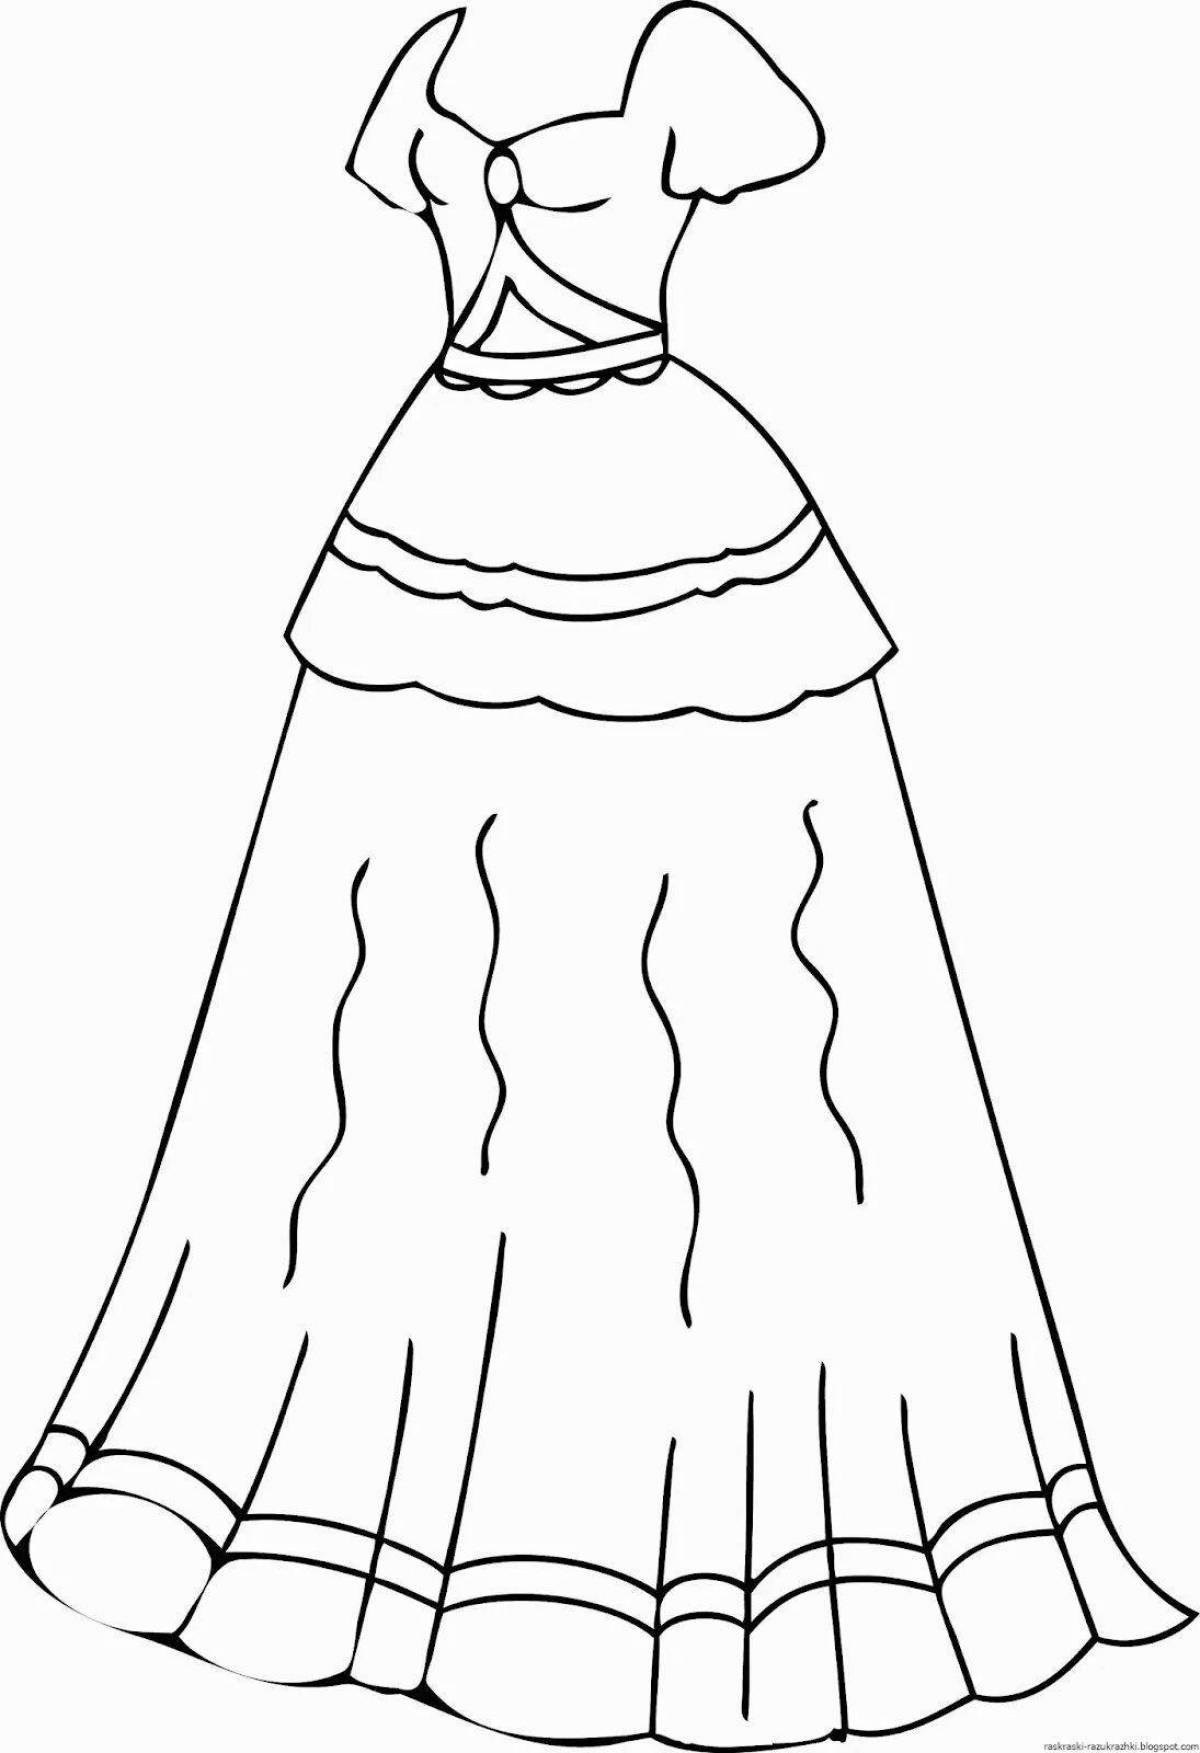 Coloring dress with cute clothes